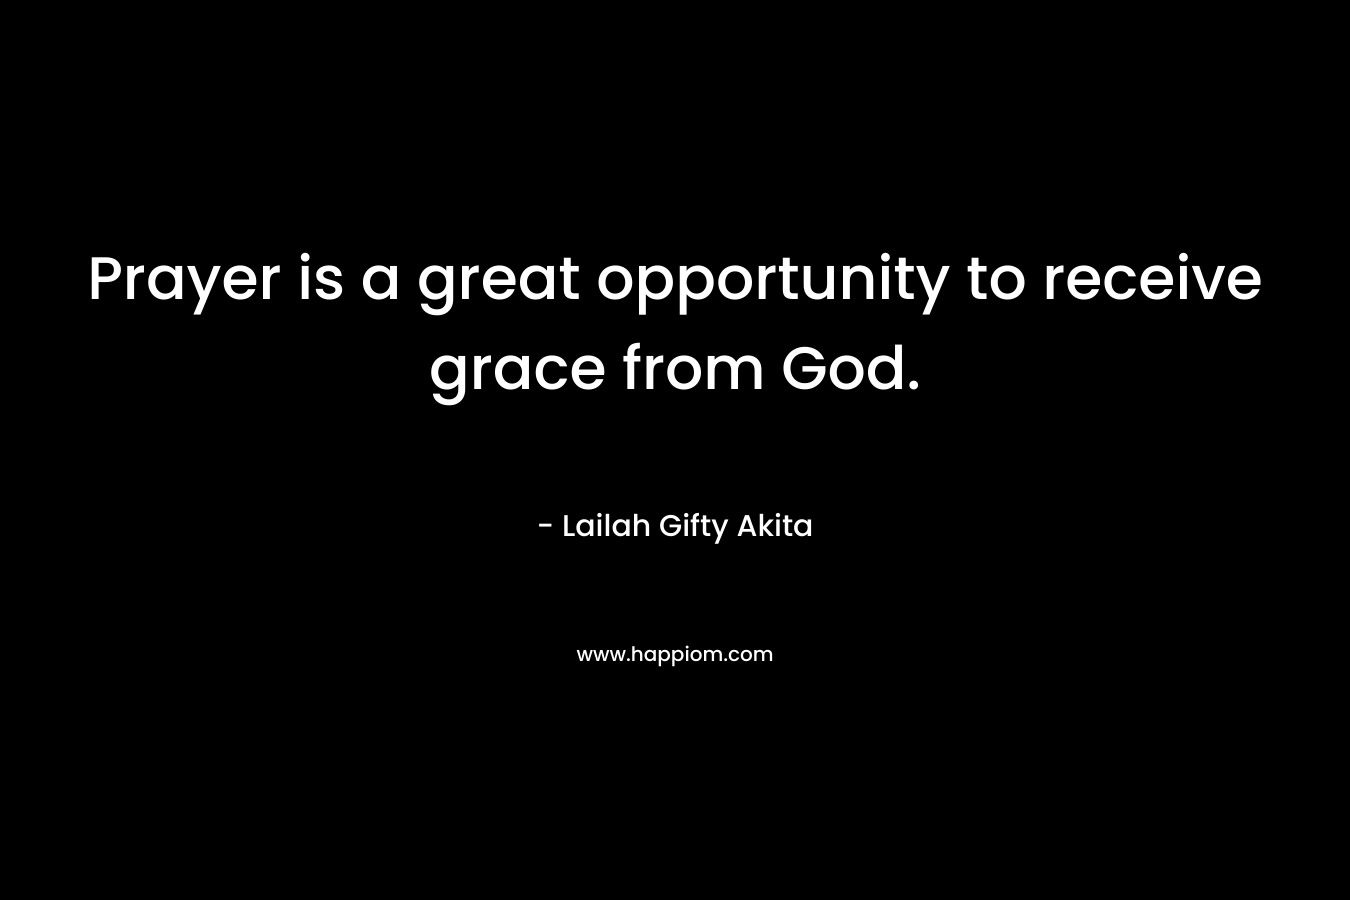 Prayer is a great opportunity to receive grace from God.